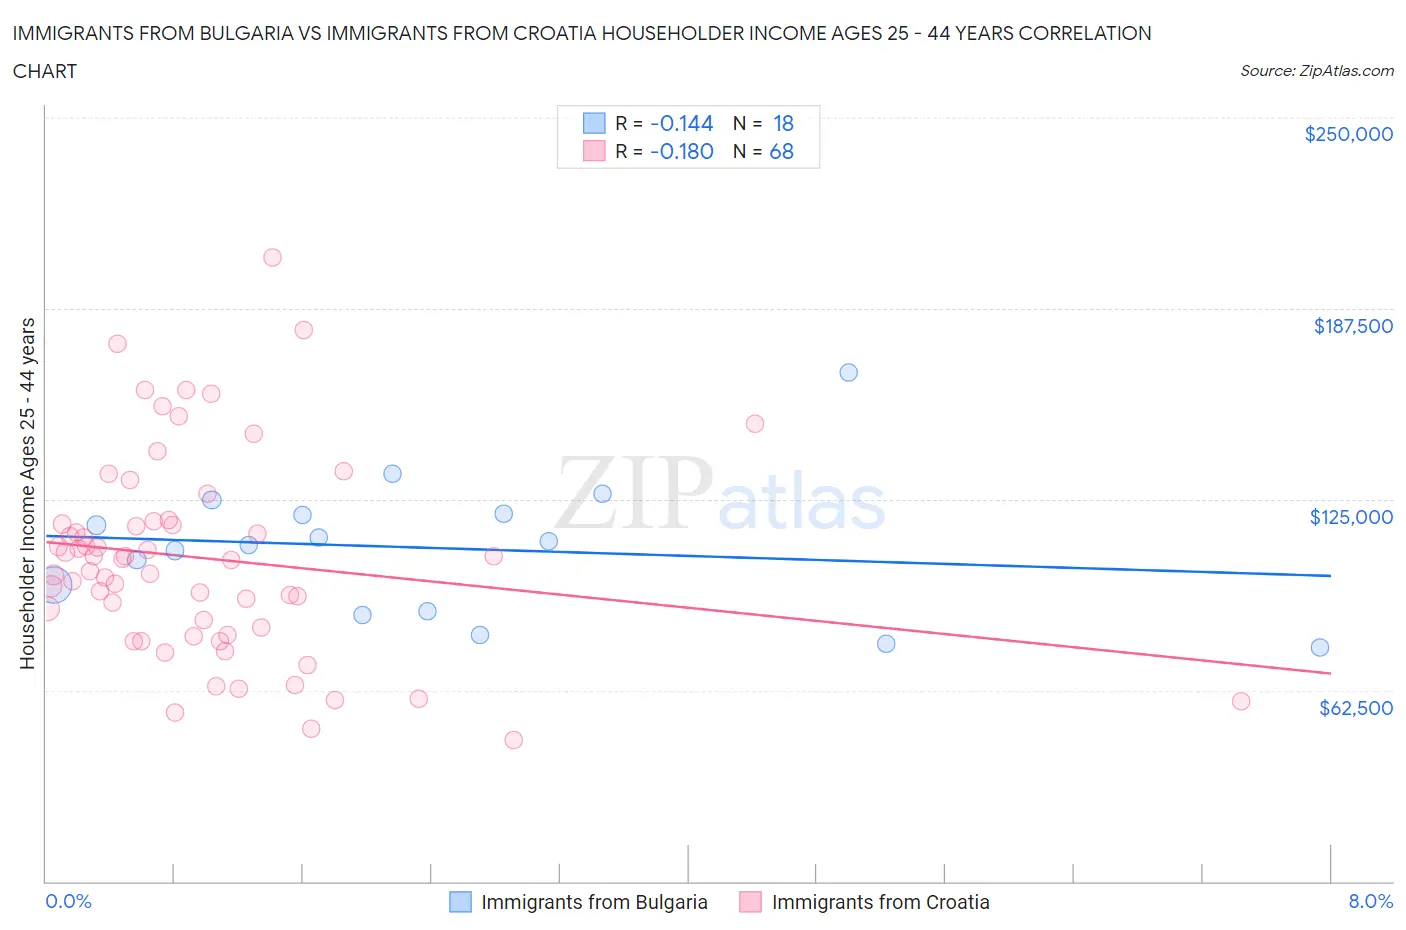 Immigrants from Bulgaria vs Immigrants from Croatia Householder Income Ages 25 - 44 years